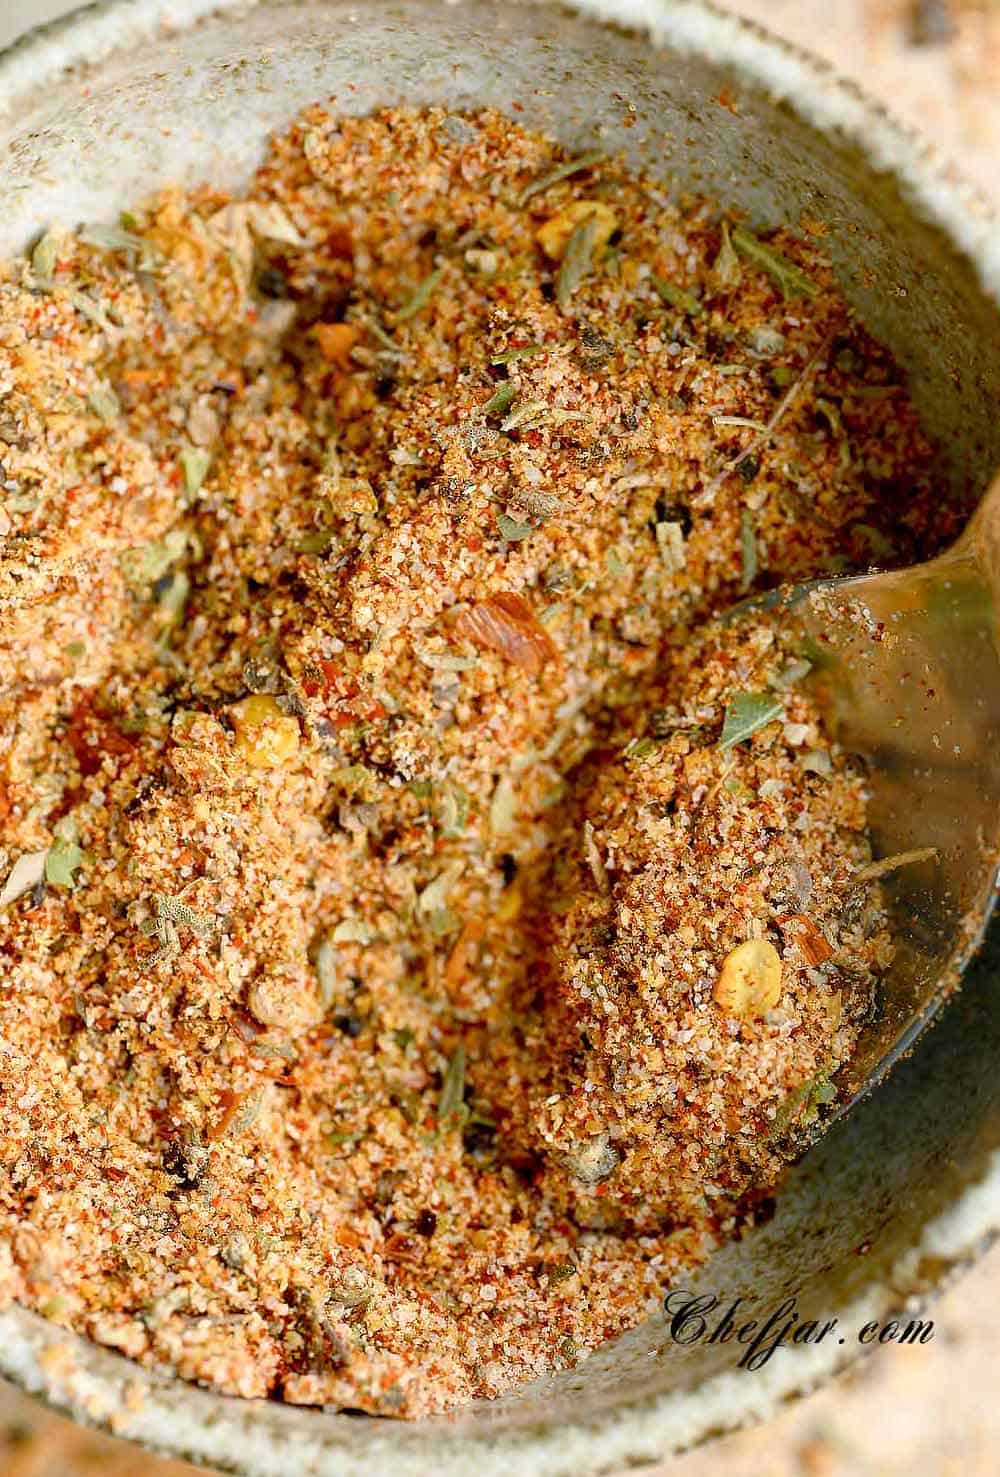 Combined meatloaf seasoning in small bowl.